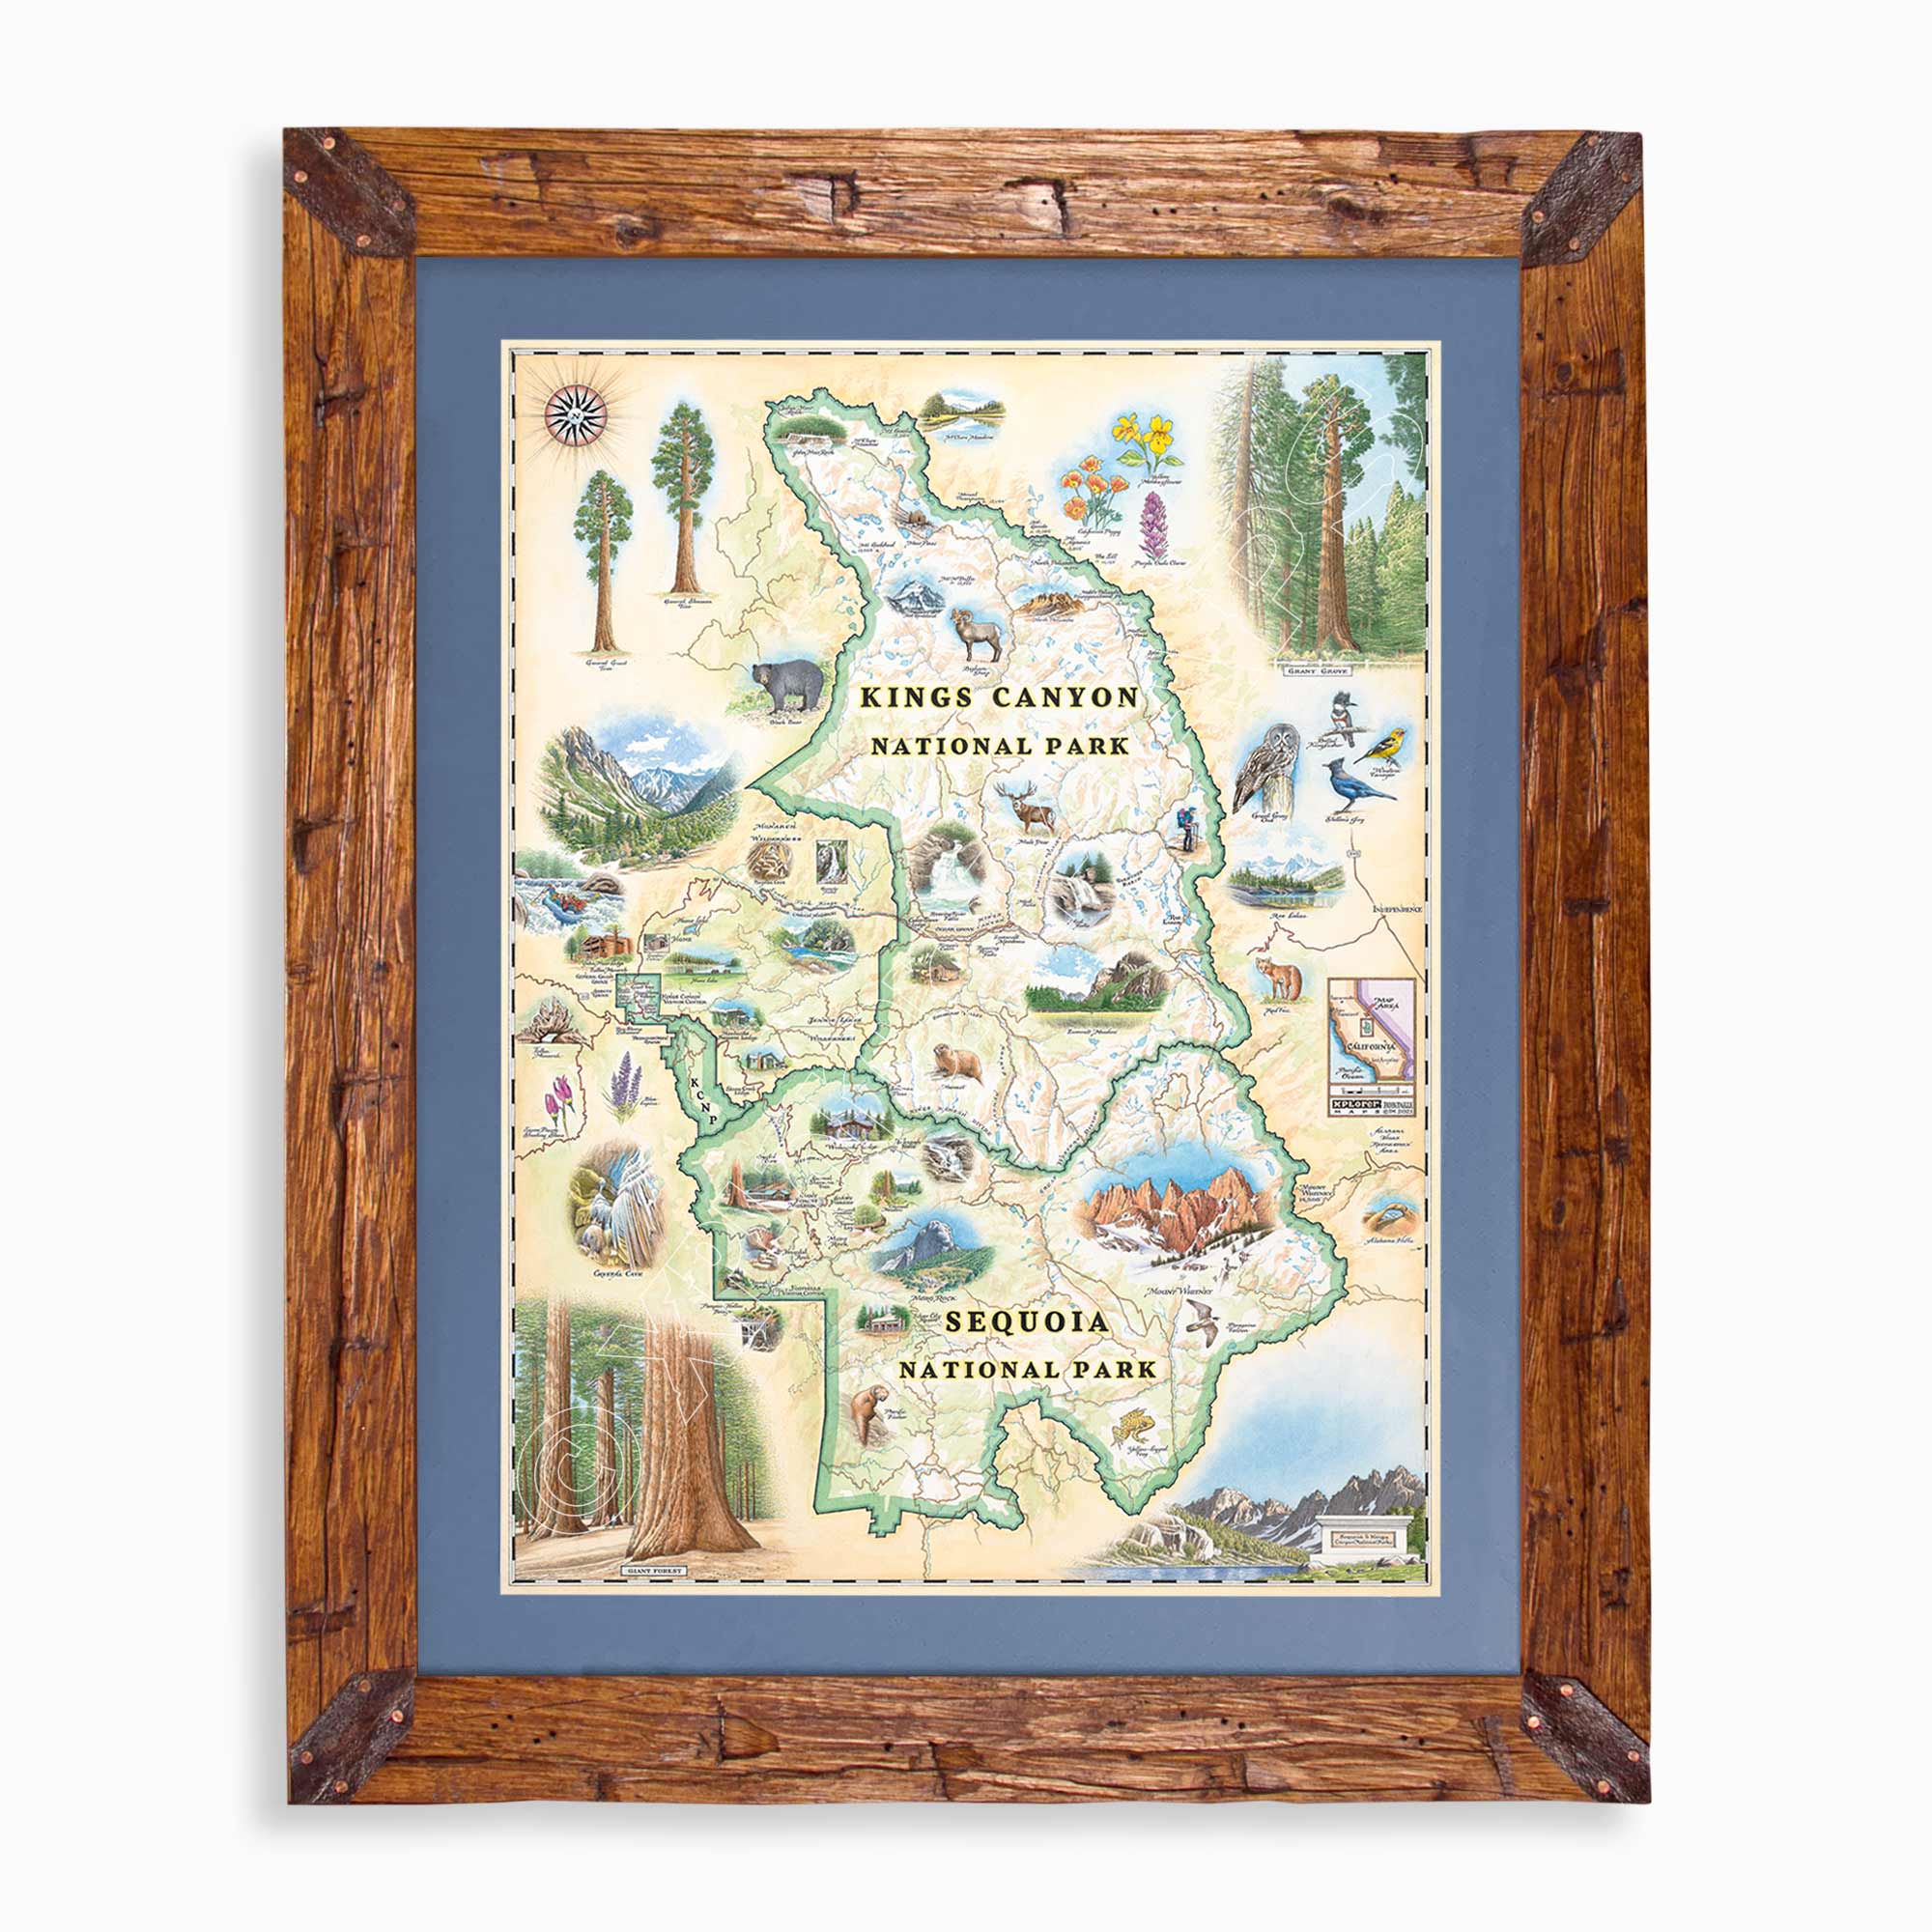 Sequoia & Kings Canyon National Parks hand-drawn map in earth tones blues and greens. The map print is framed in Montana hand-scraped pine with a blue mat.